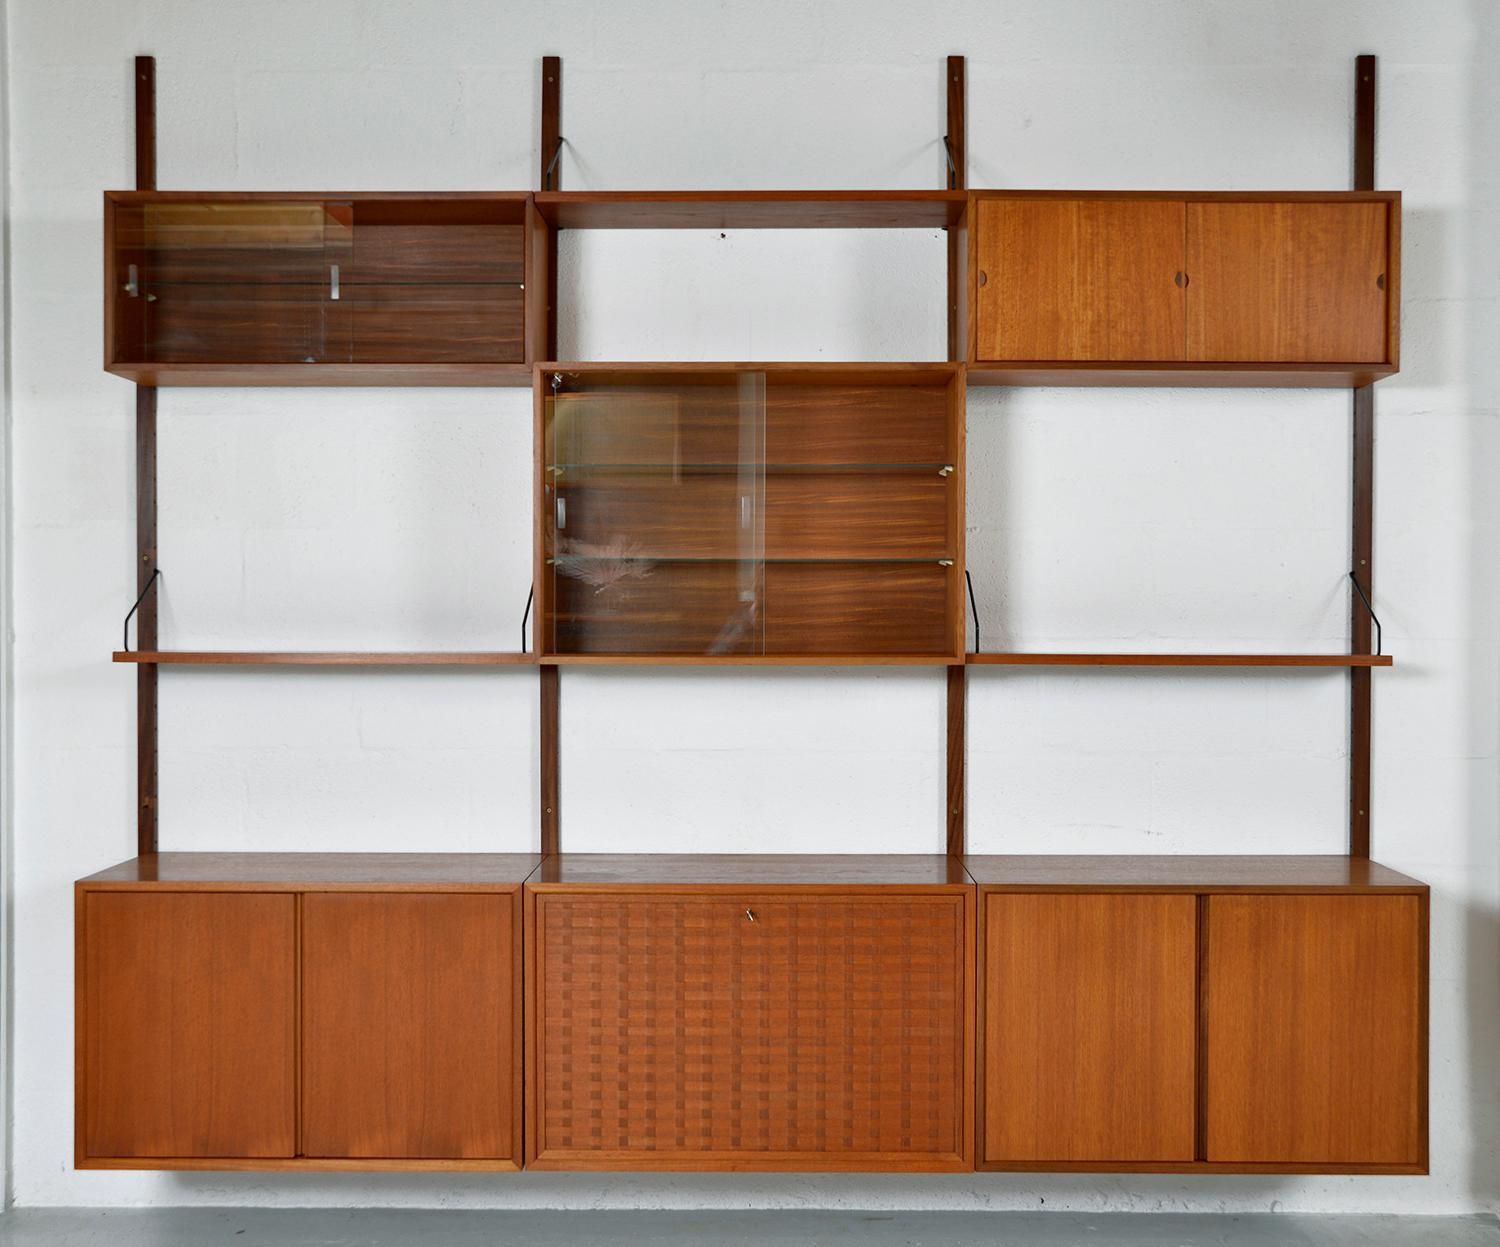 This highly versatile and functional “Royal System”, originally designed by Poul Cadovius in 1948, offers a wide variety of storage and display options. 
This particular modular arrangement comprises 4 uprights, 3 shelves, 2 glass-fronted cabinets